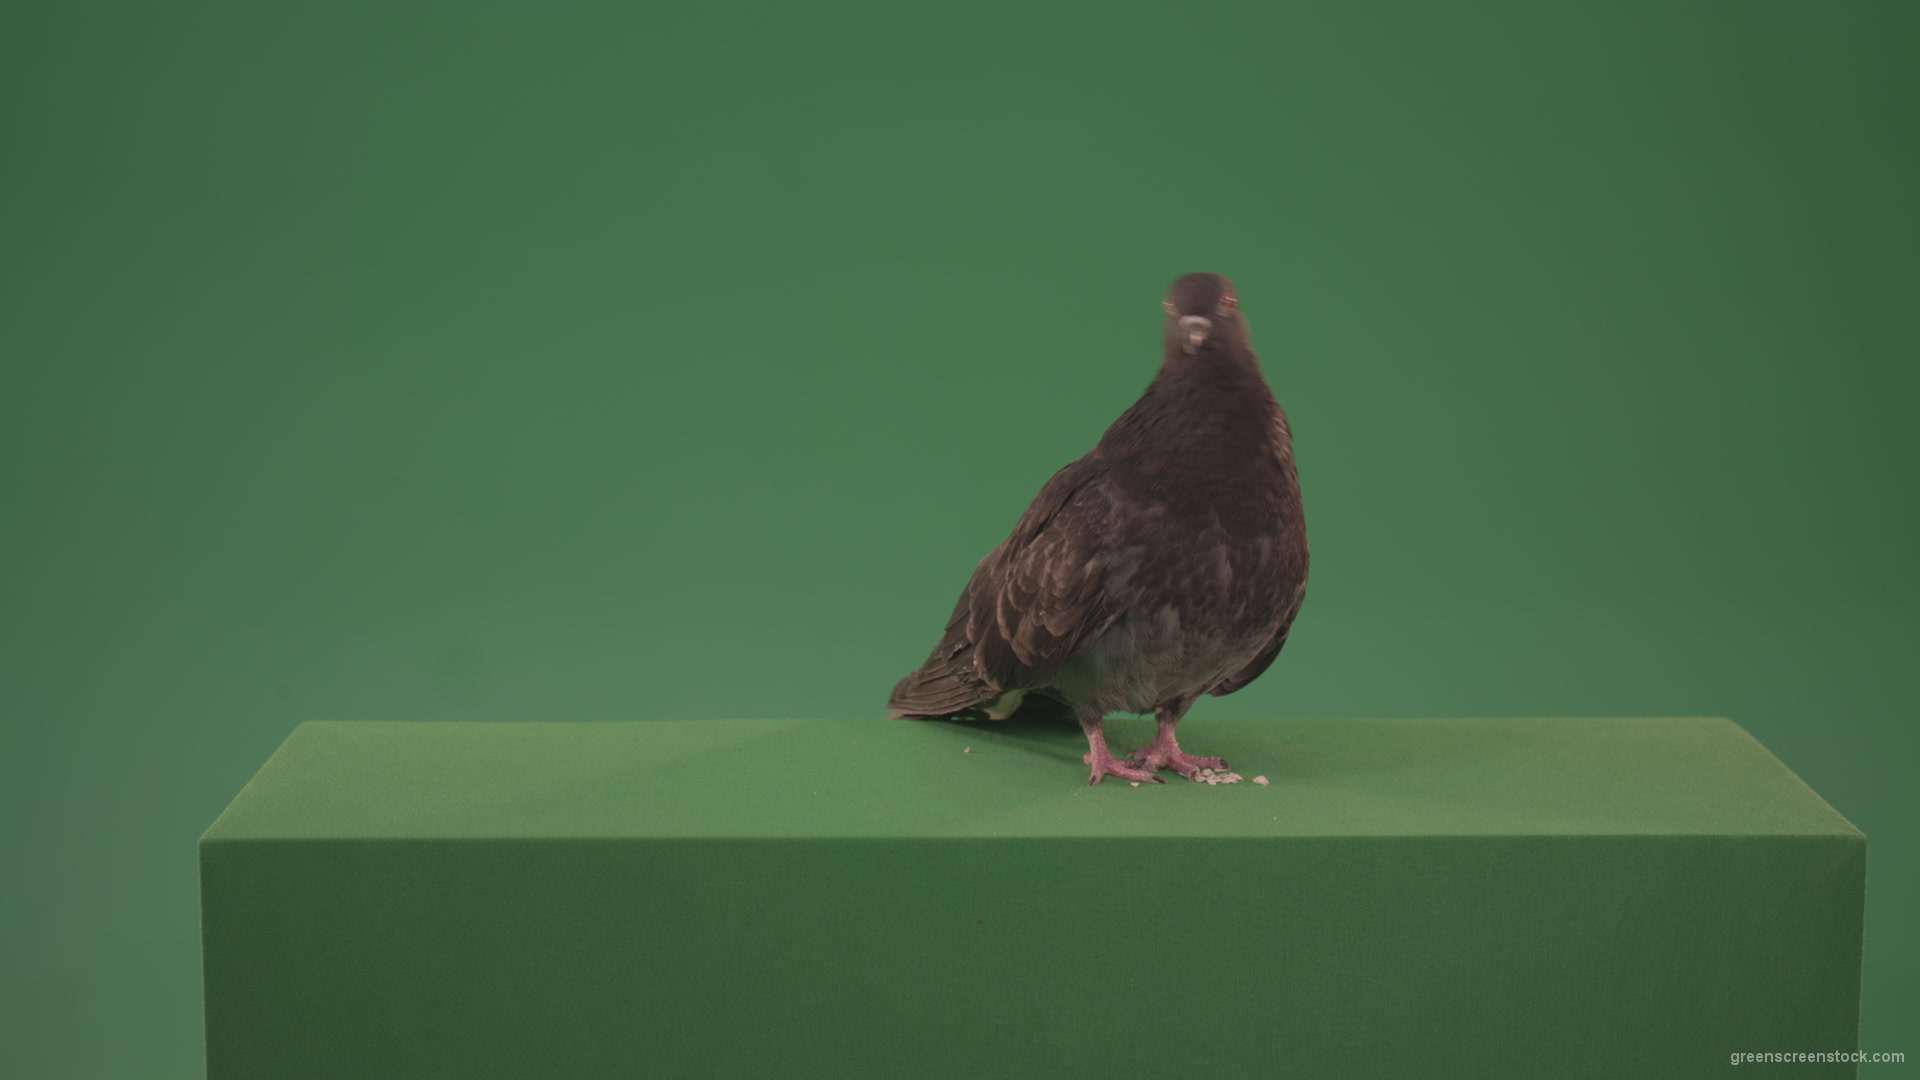 Bird-of-gray-beige-goes-in-different-directions-isolated-on-chromakey-background_007 Green Screen Stock